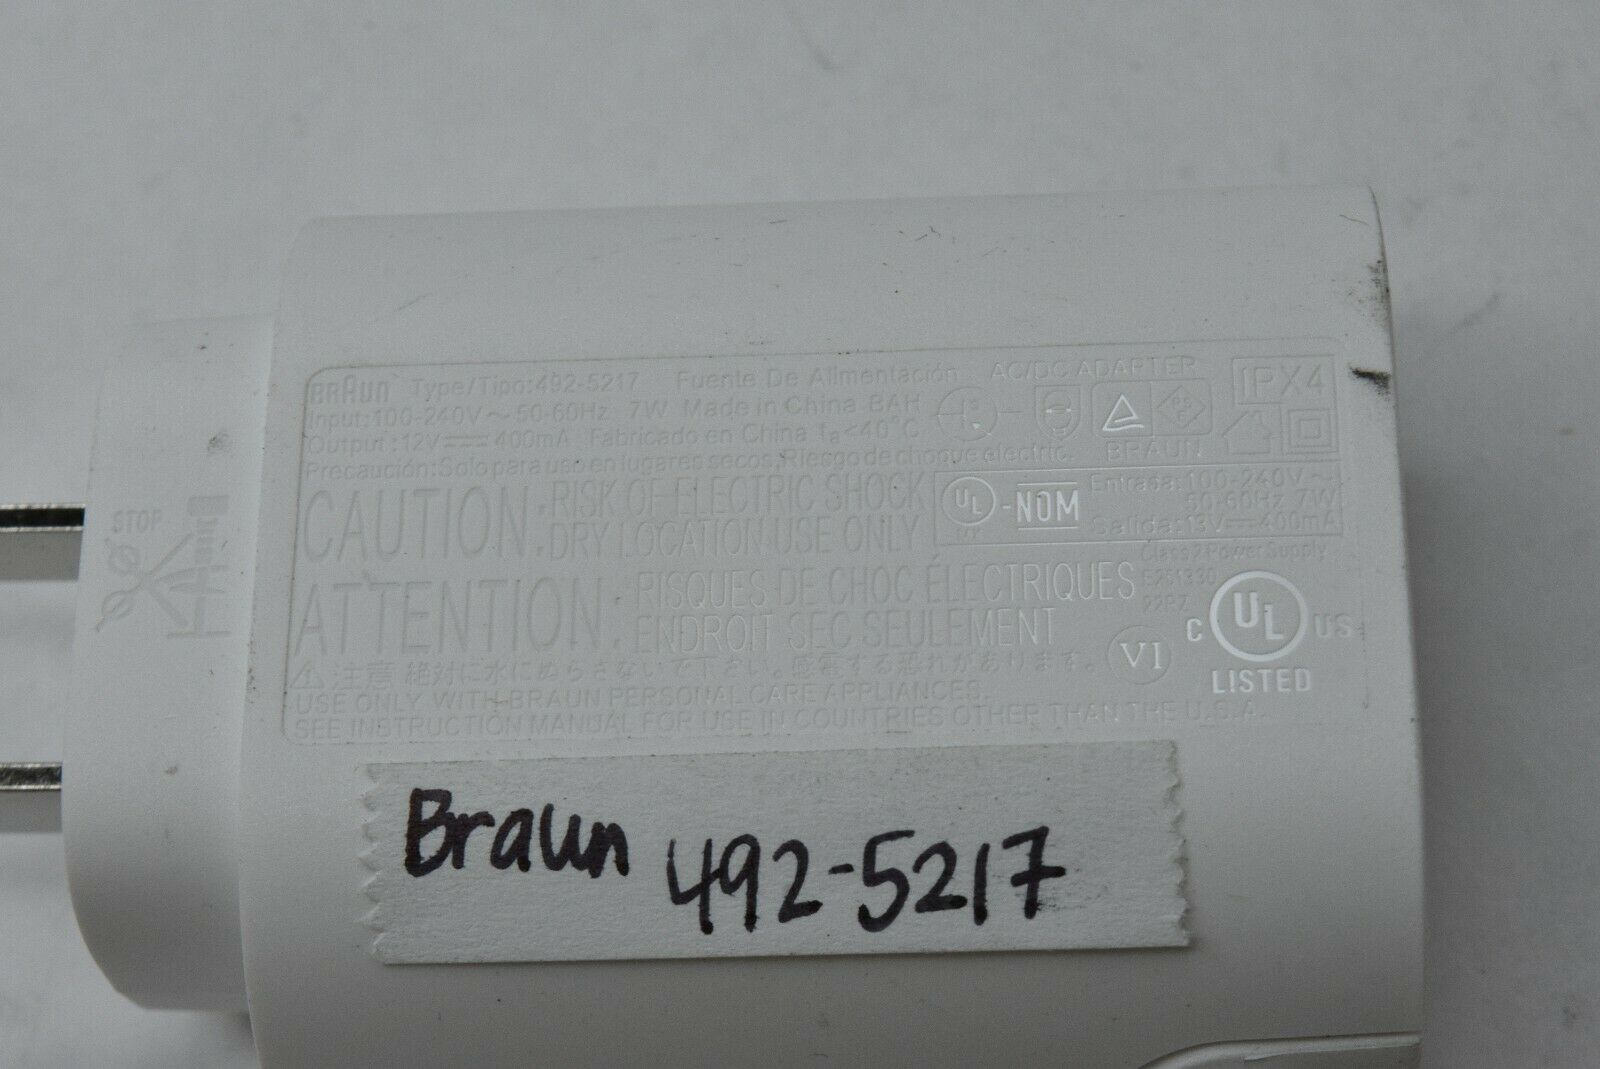 Braun AC/DC Adapter Power Supply Unit 492-5217 12V 400mA Type: AC/DC Adapter Output Voltage: 12 V Brand: Braun Br - Click Image to Close